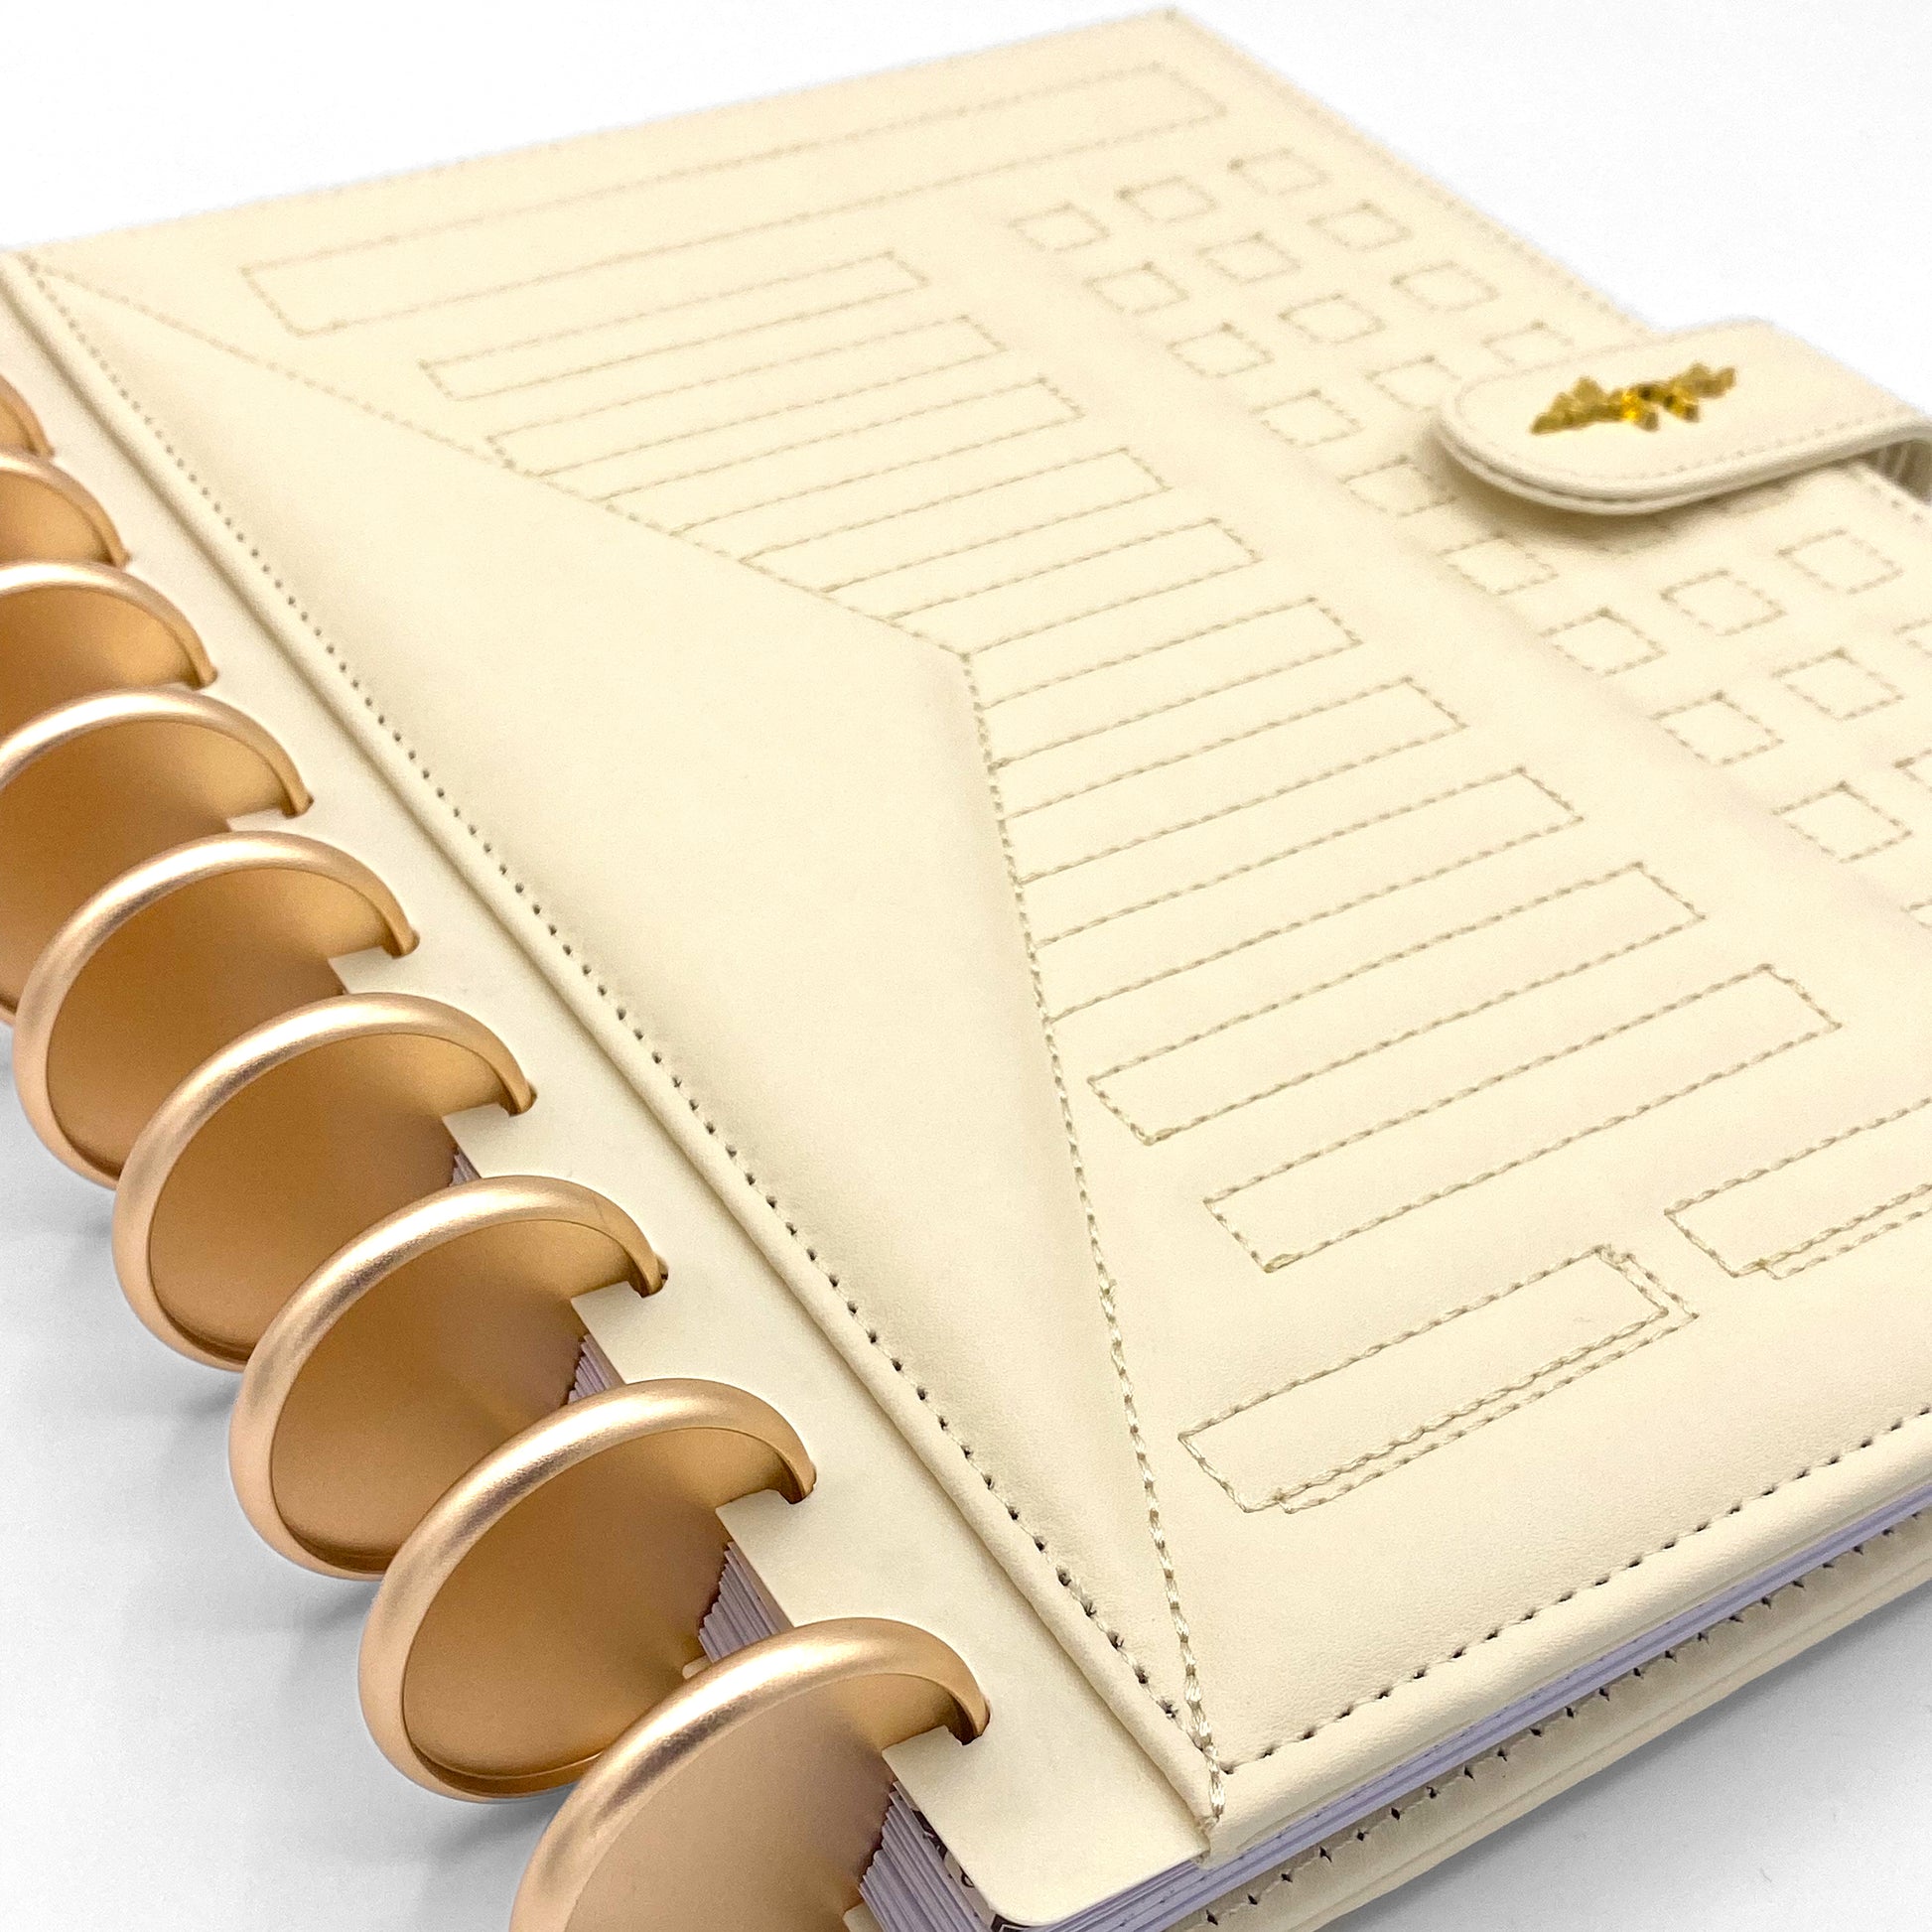 Cream faux leather planner with gold discs